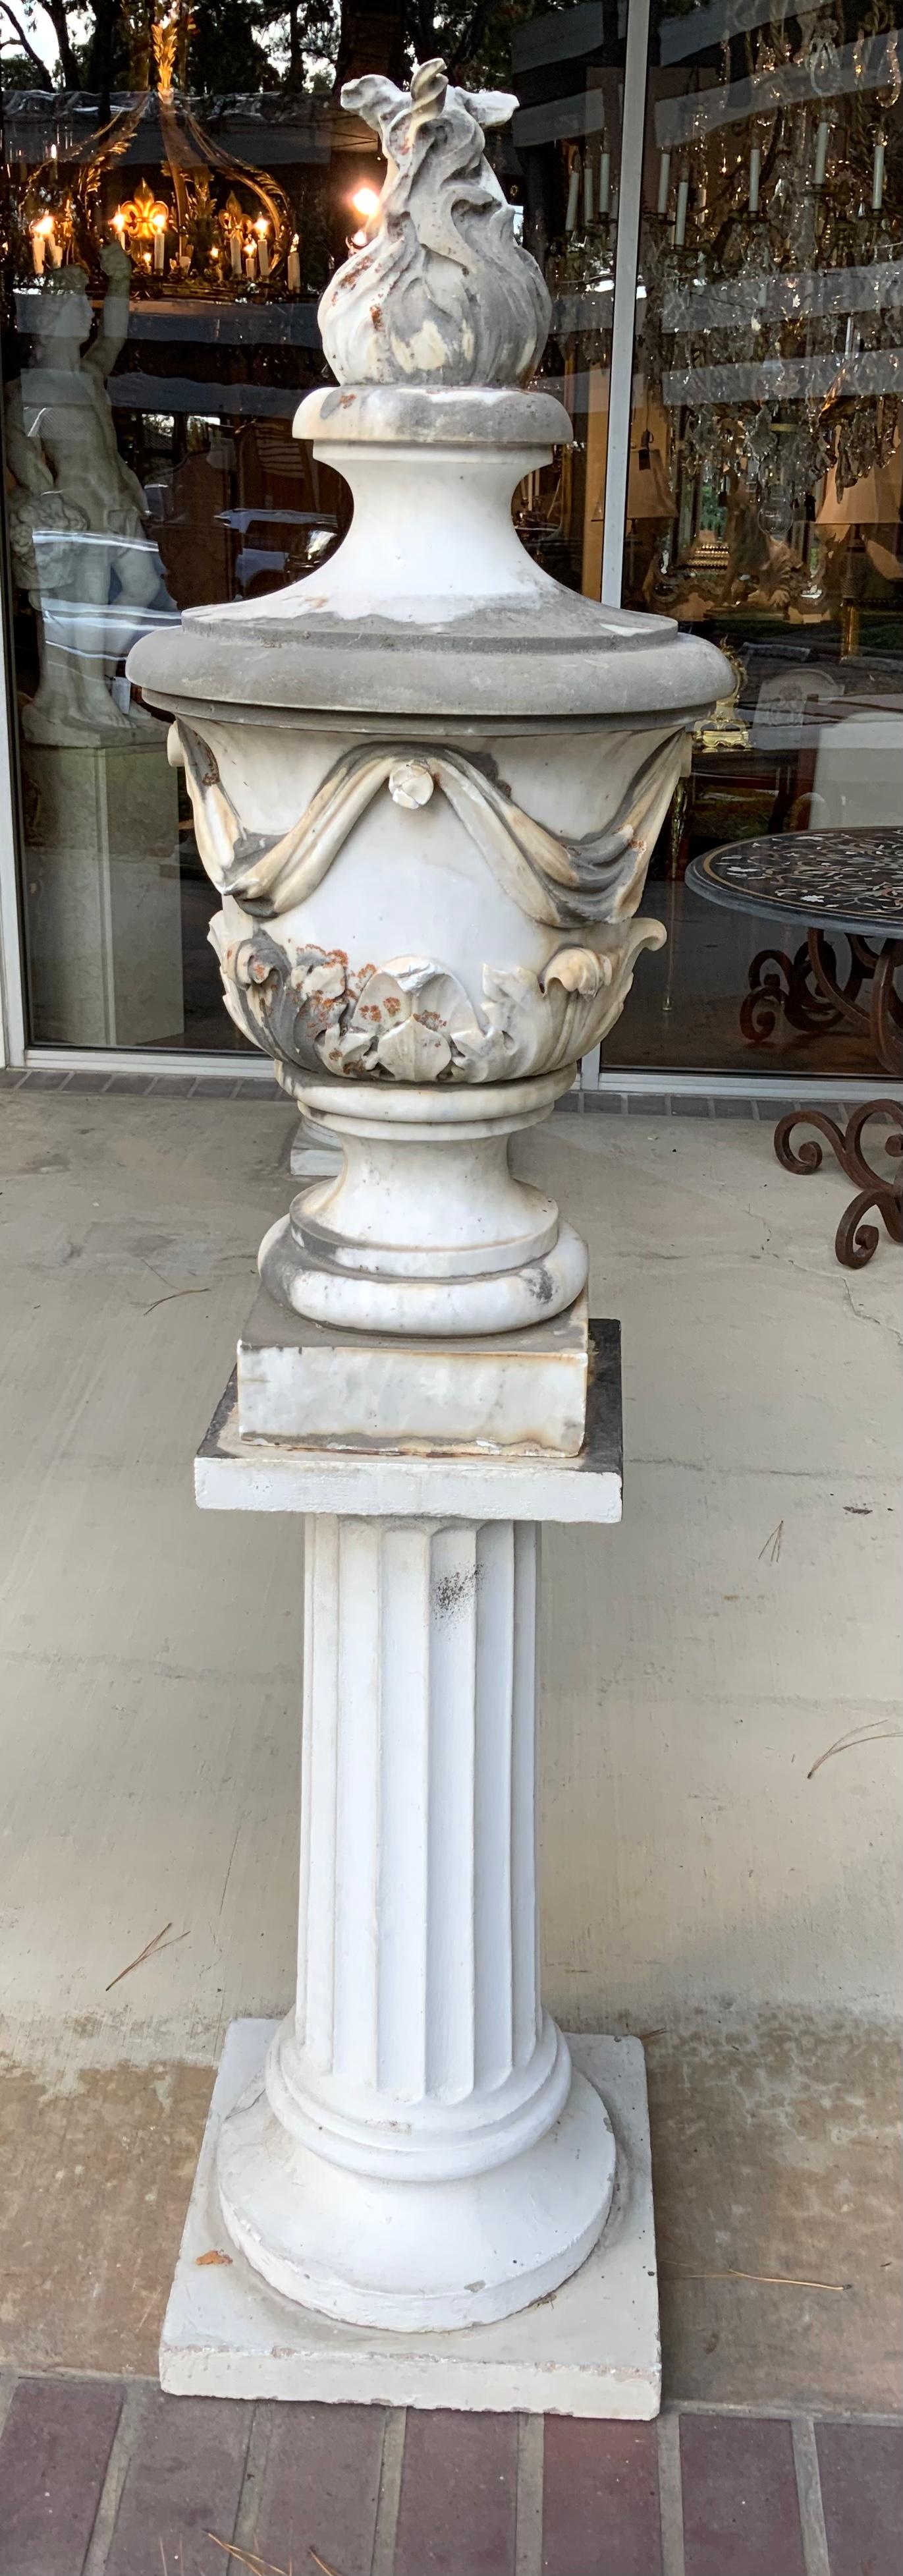 Hand-Carved Pair of Antique Marble Carved Urns on Pedestals For Sale